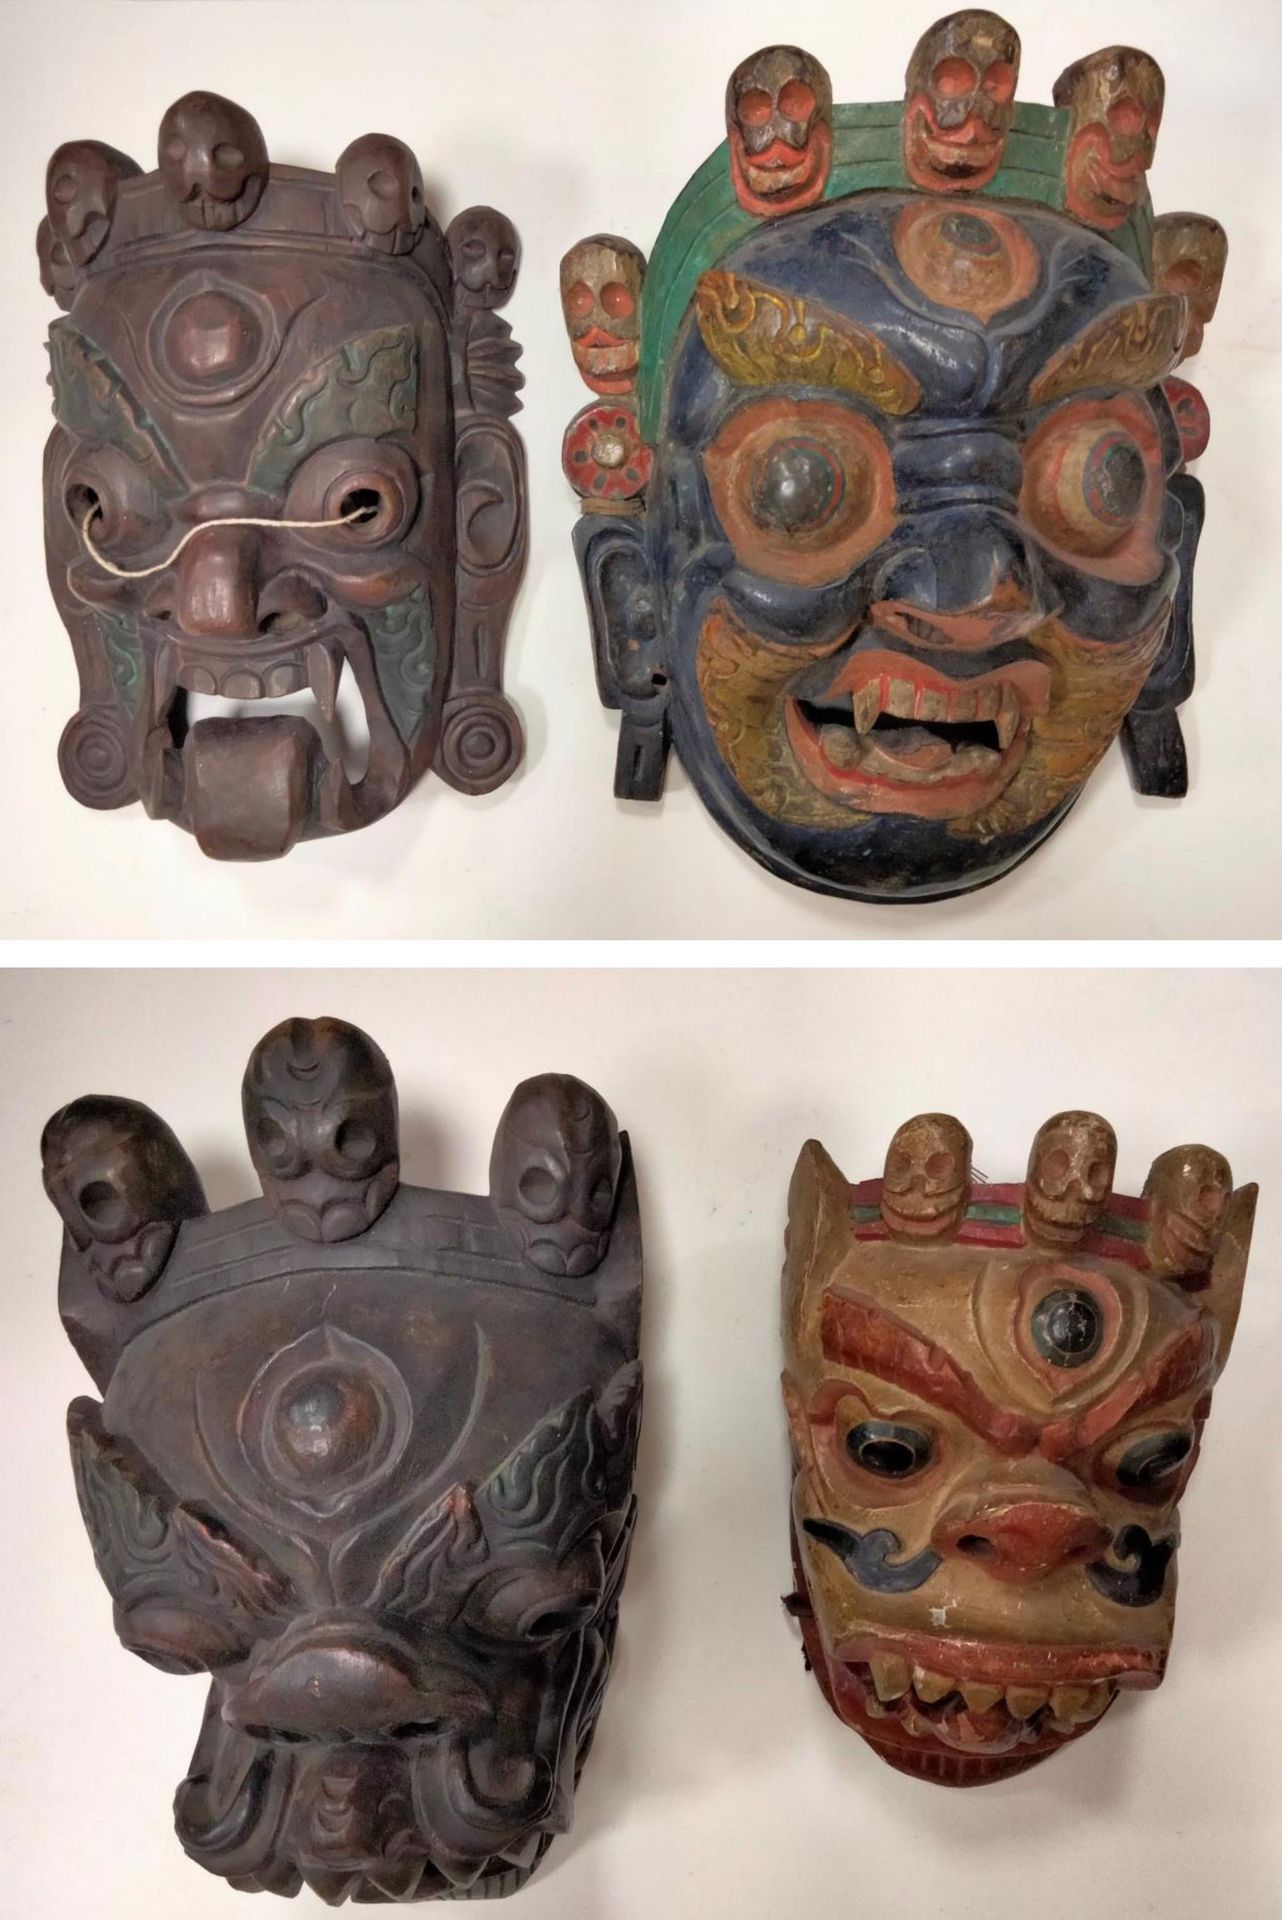 Null Set of 4 ritual masks, Tibet or Nepal, 20th
centuryWood. Including:
- 2 mas&hellip;